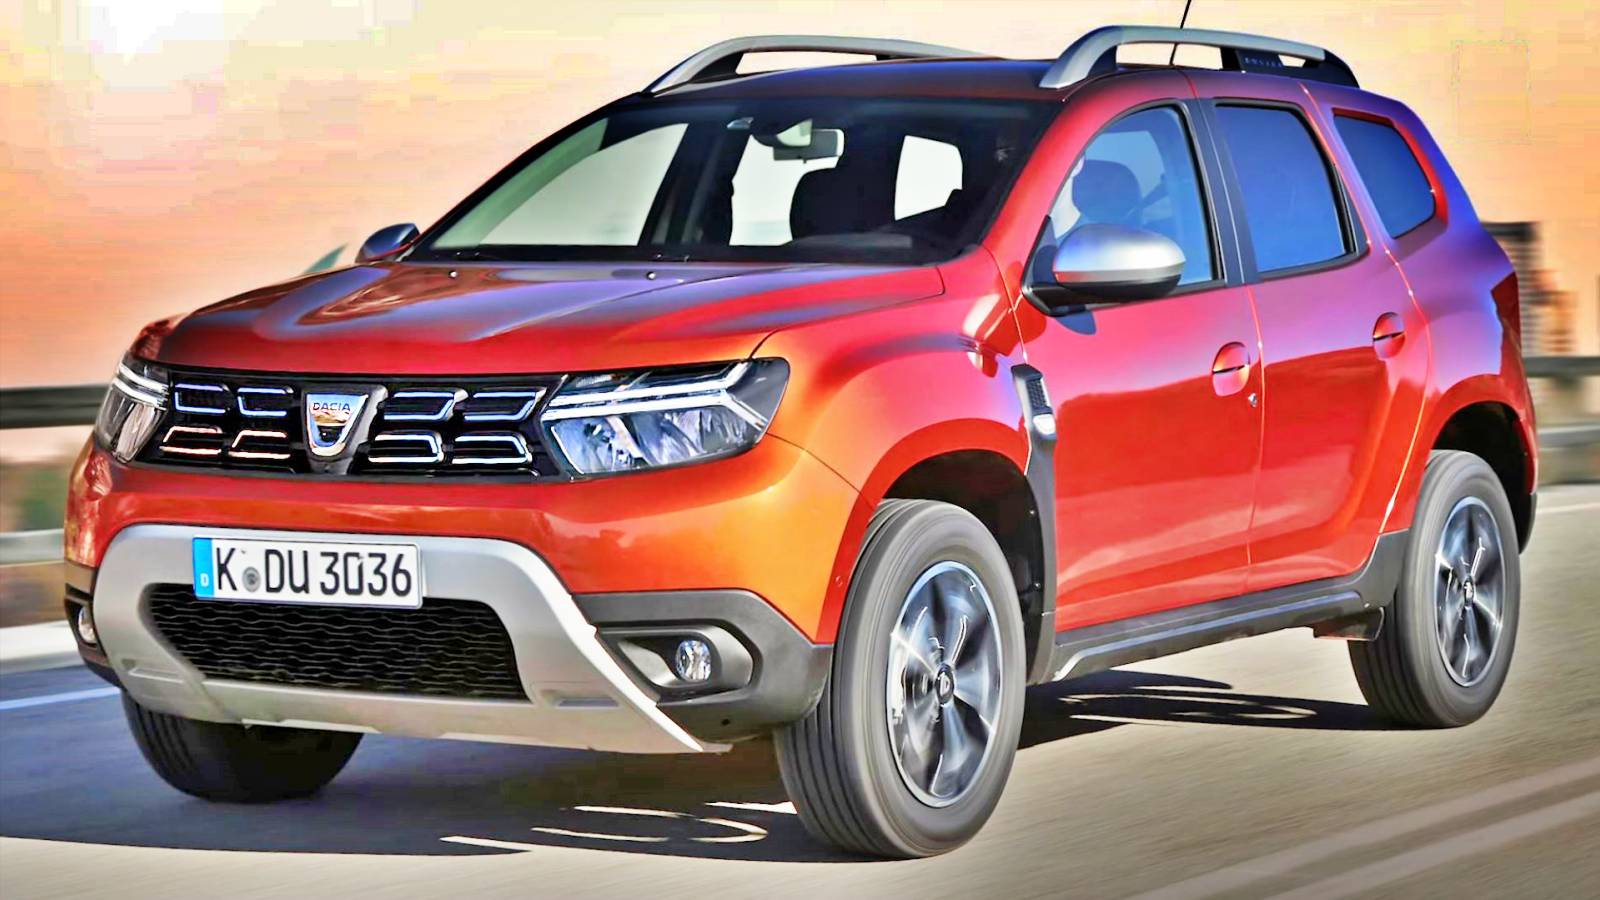 Protection DACIA Duster 2021